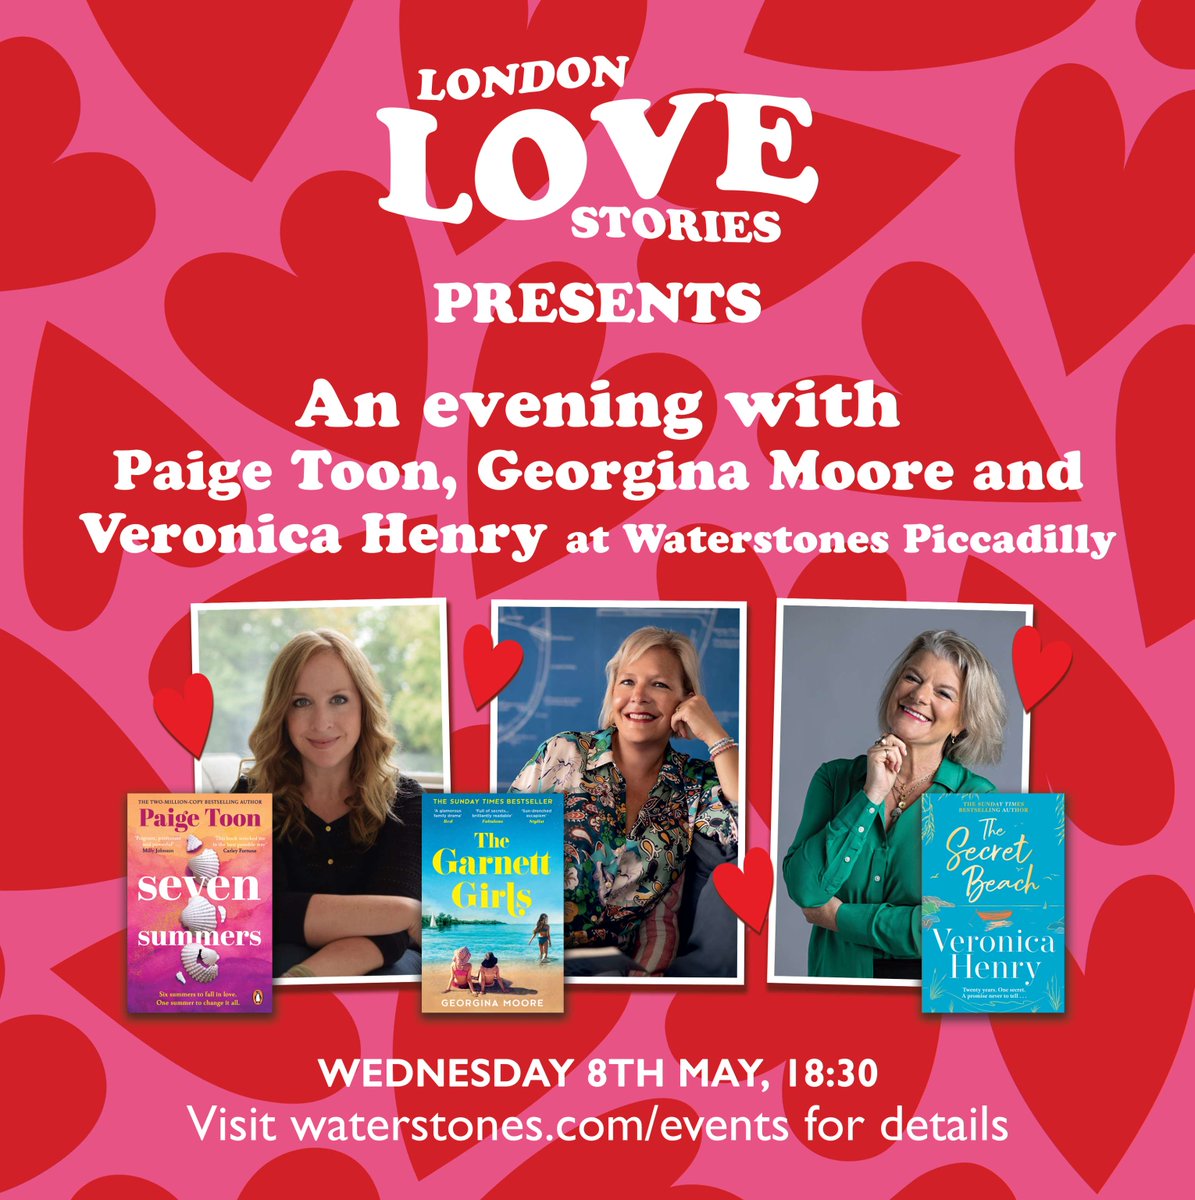 ❤ London Love Stories presents an evening with Paige Toon, Georgina Moore and Veronica Henry at Waterstones Piccadilly
🎫 waterstones.com/events/london-…
#RespectRomance
@Waterstonespicc
@publicitybooks
@paigetoonauthor
@veronica_henry